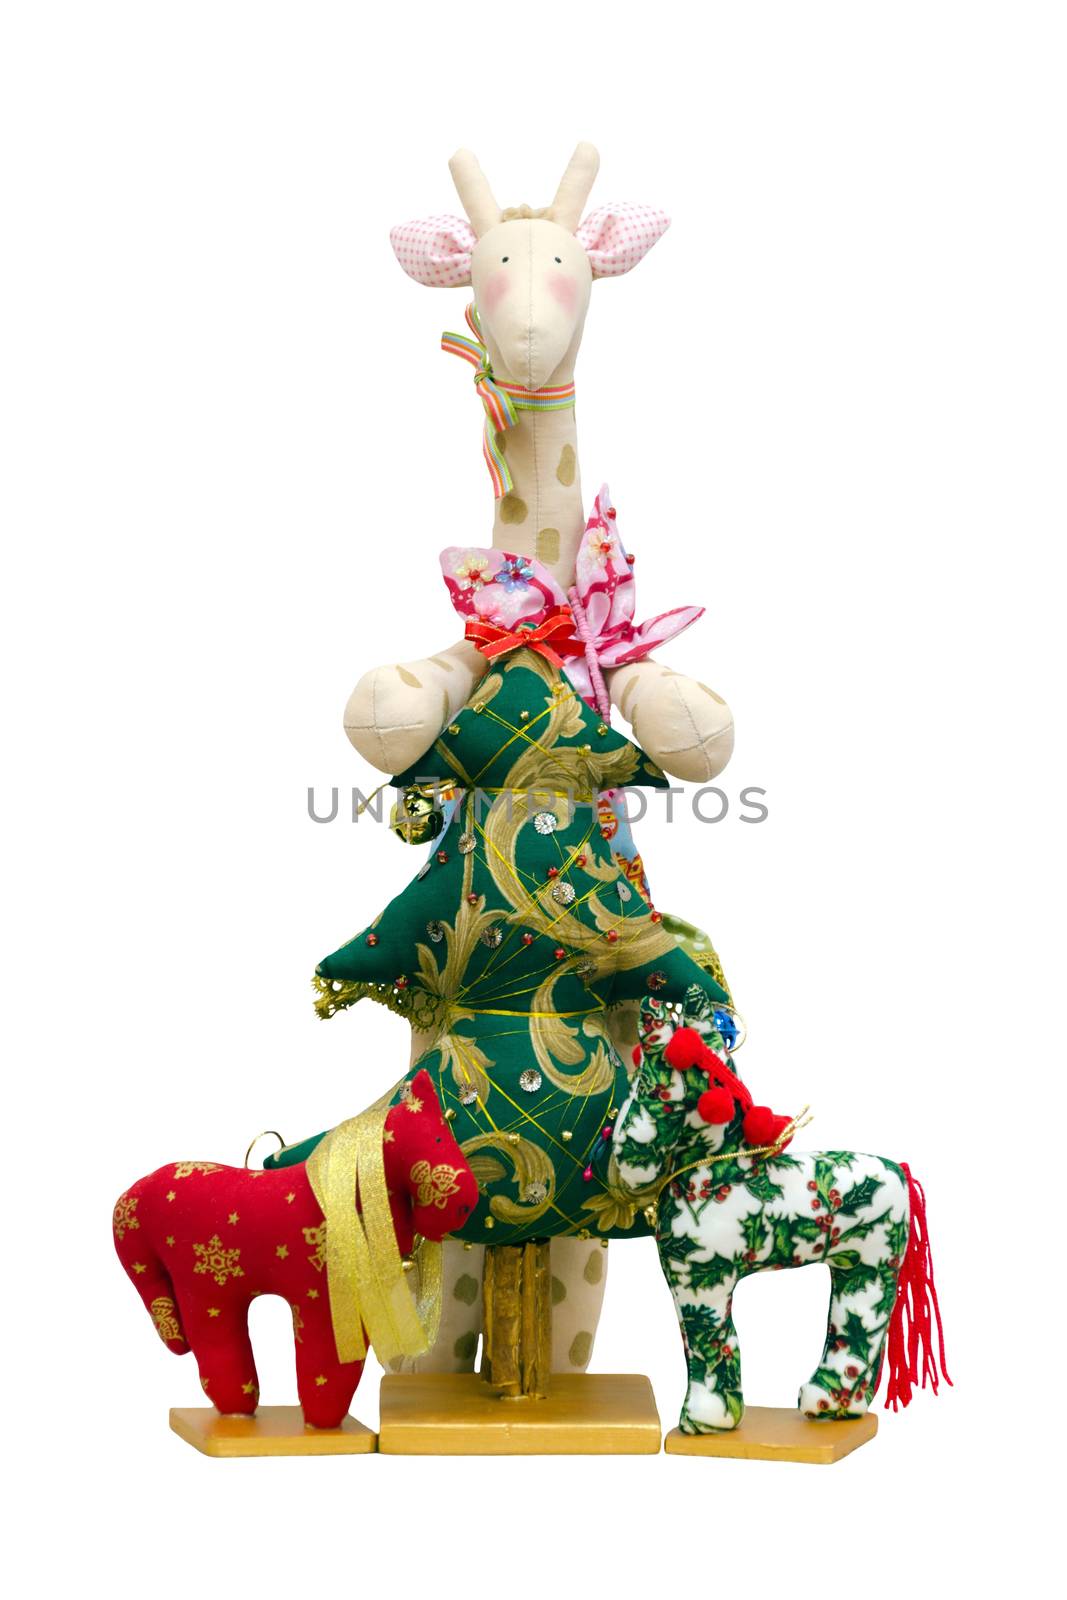 The Handmade soft toy isolated New Year tree and giraffe and two ponys